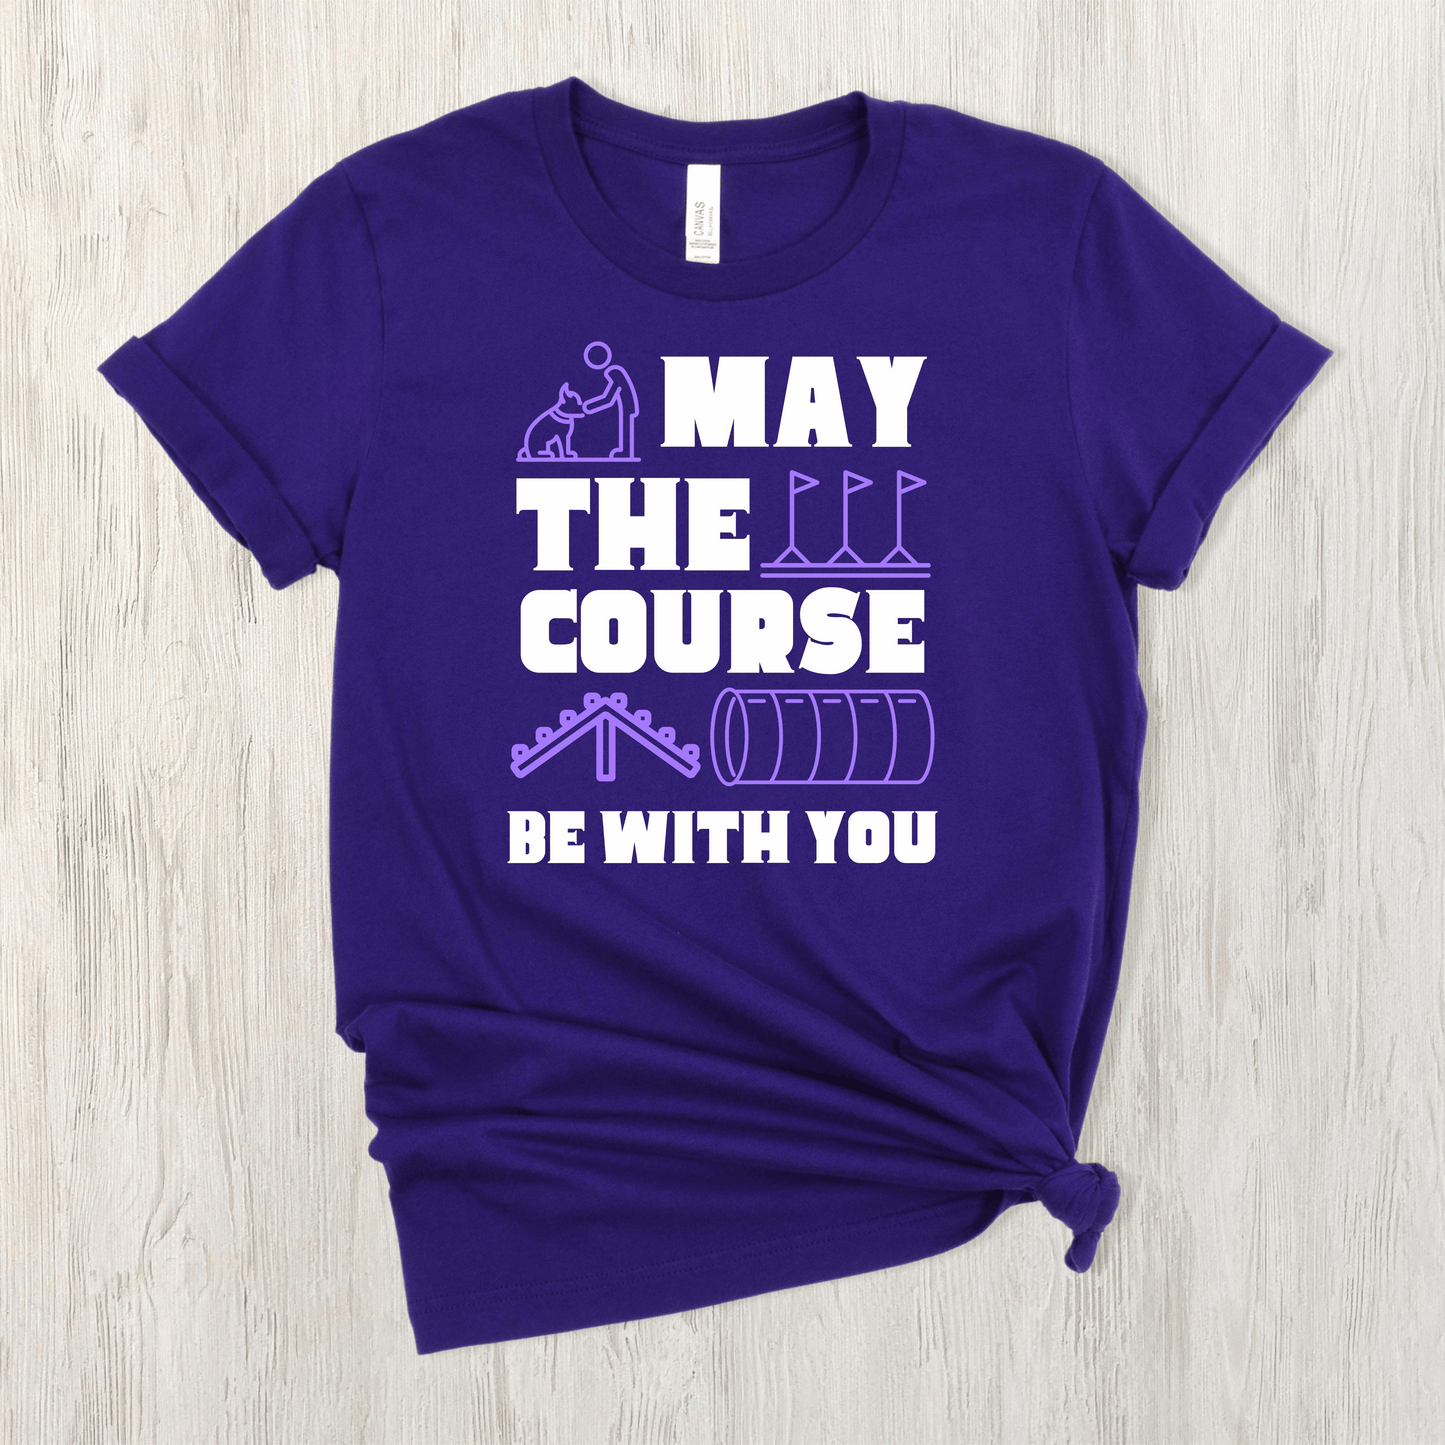 Purple tee featuring the text "May The Force Be With You" as well as agility related images.